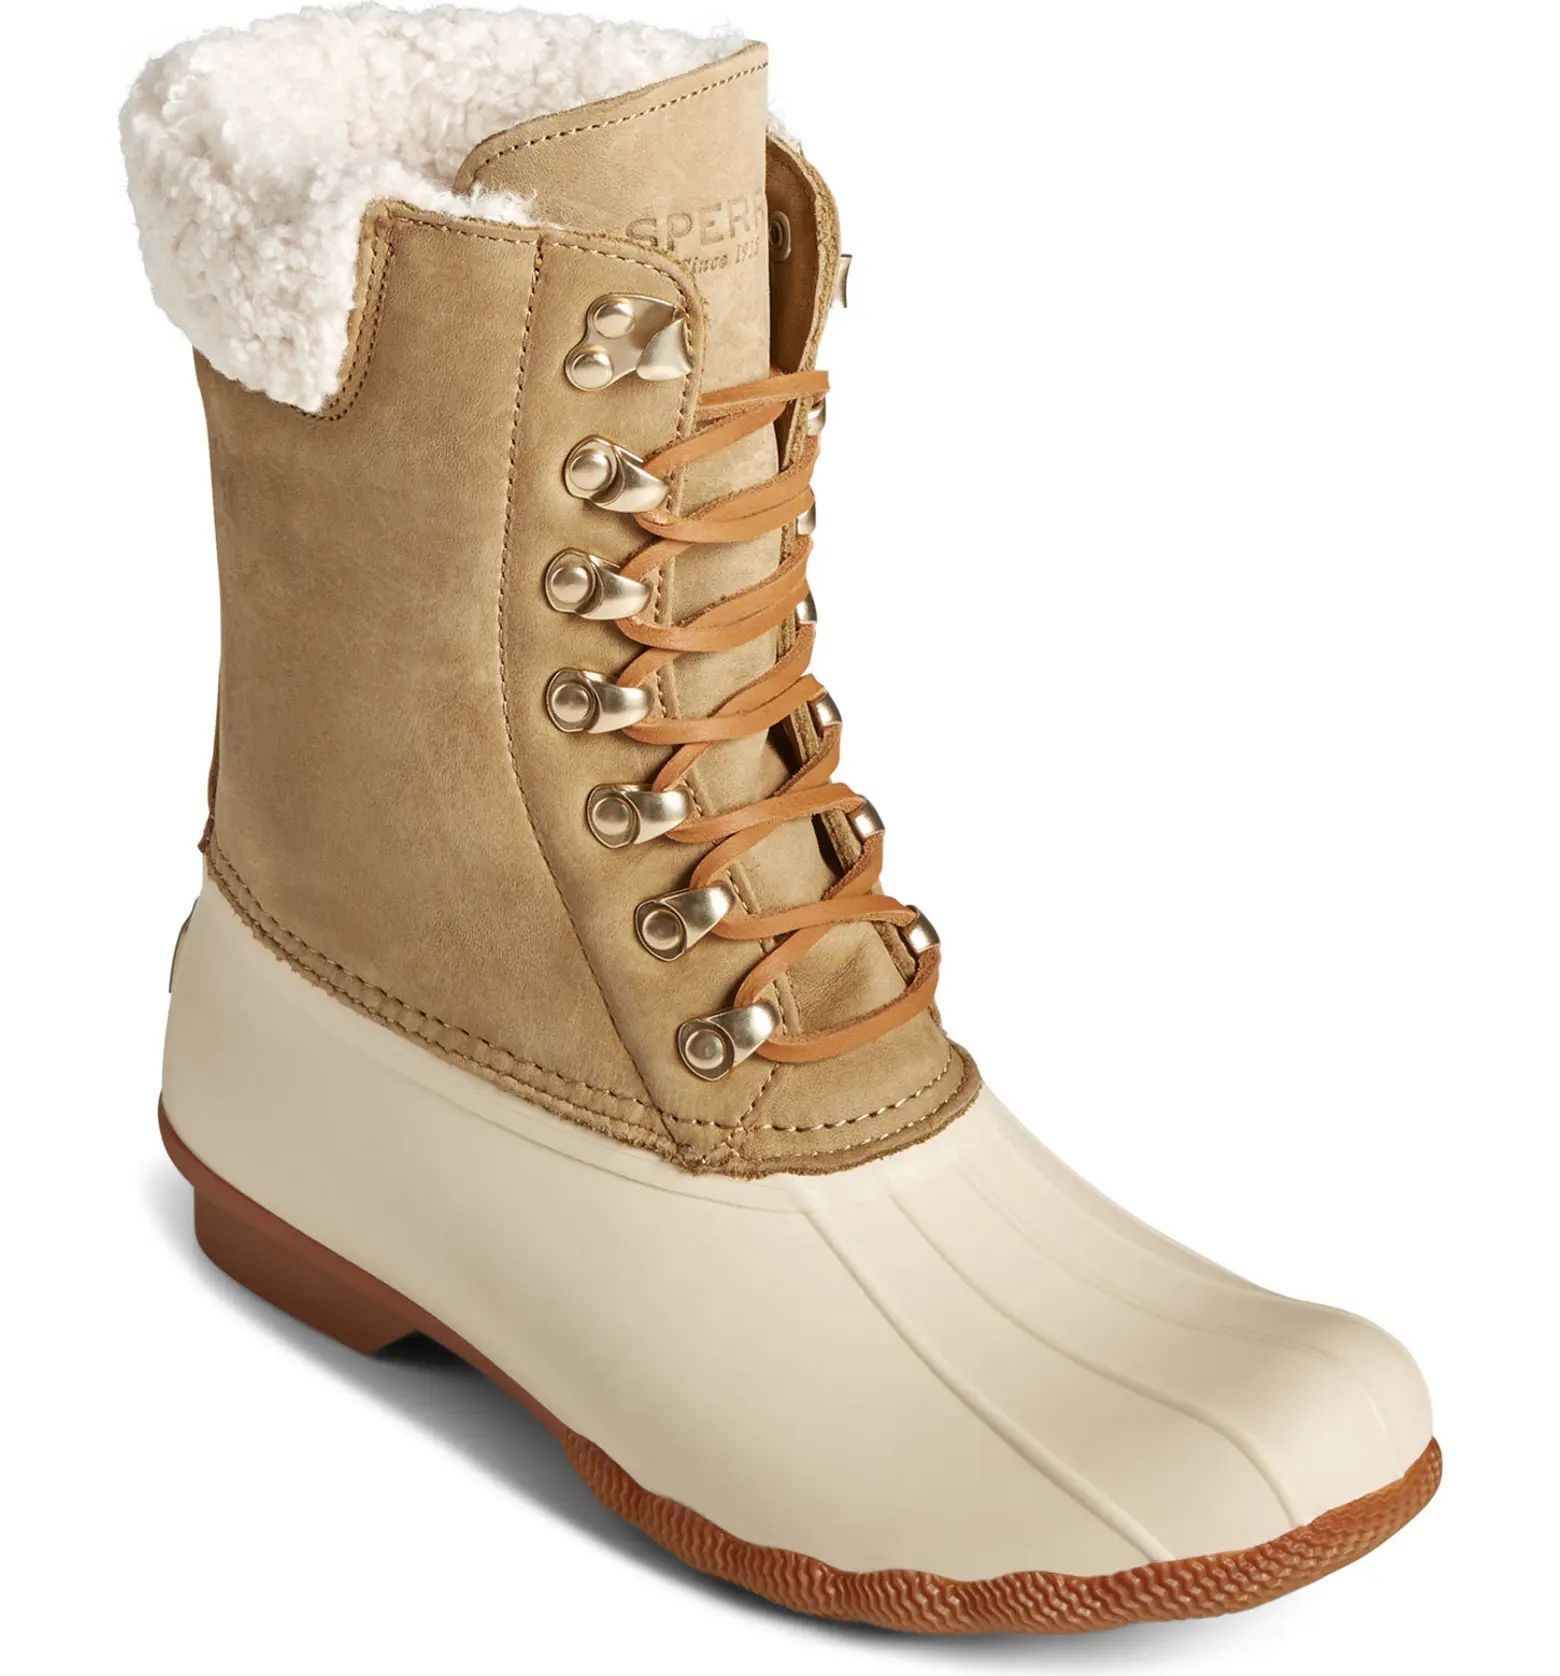 SPERRY TOP-SIDER Saltwater Tall Leather Faux Shearling Lined Duck Boot | Nordstromrack | Nordstrom Rack